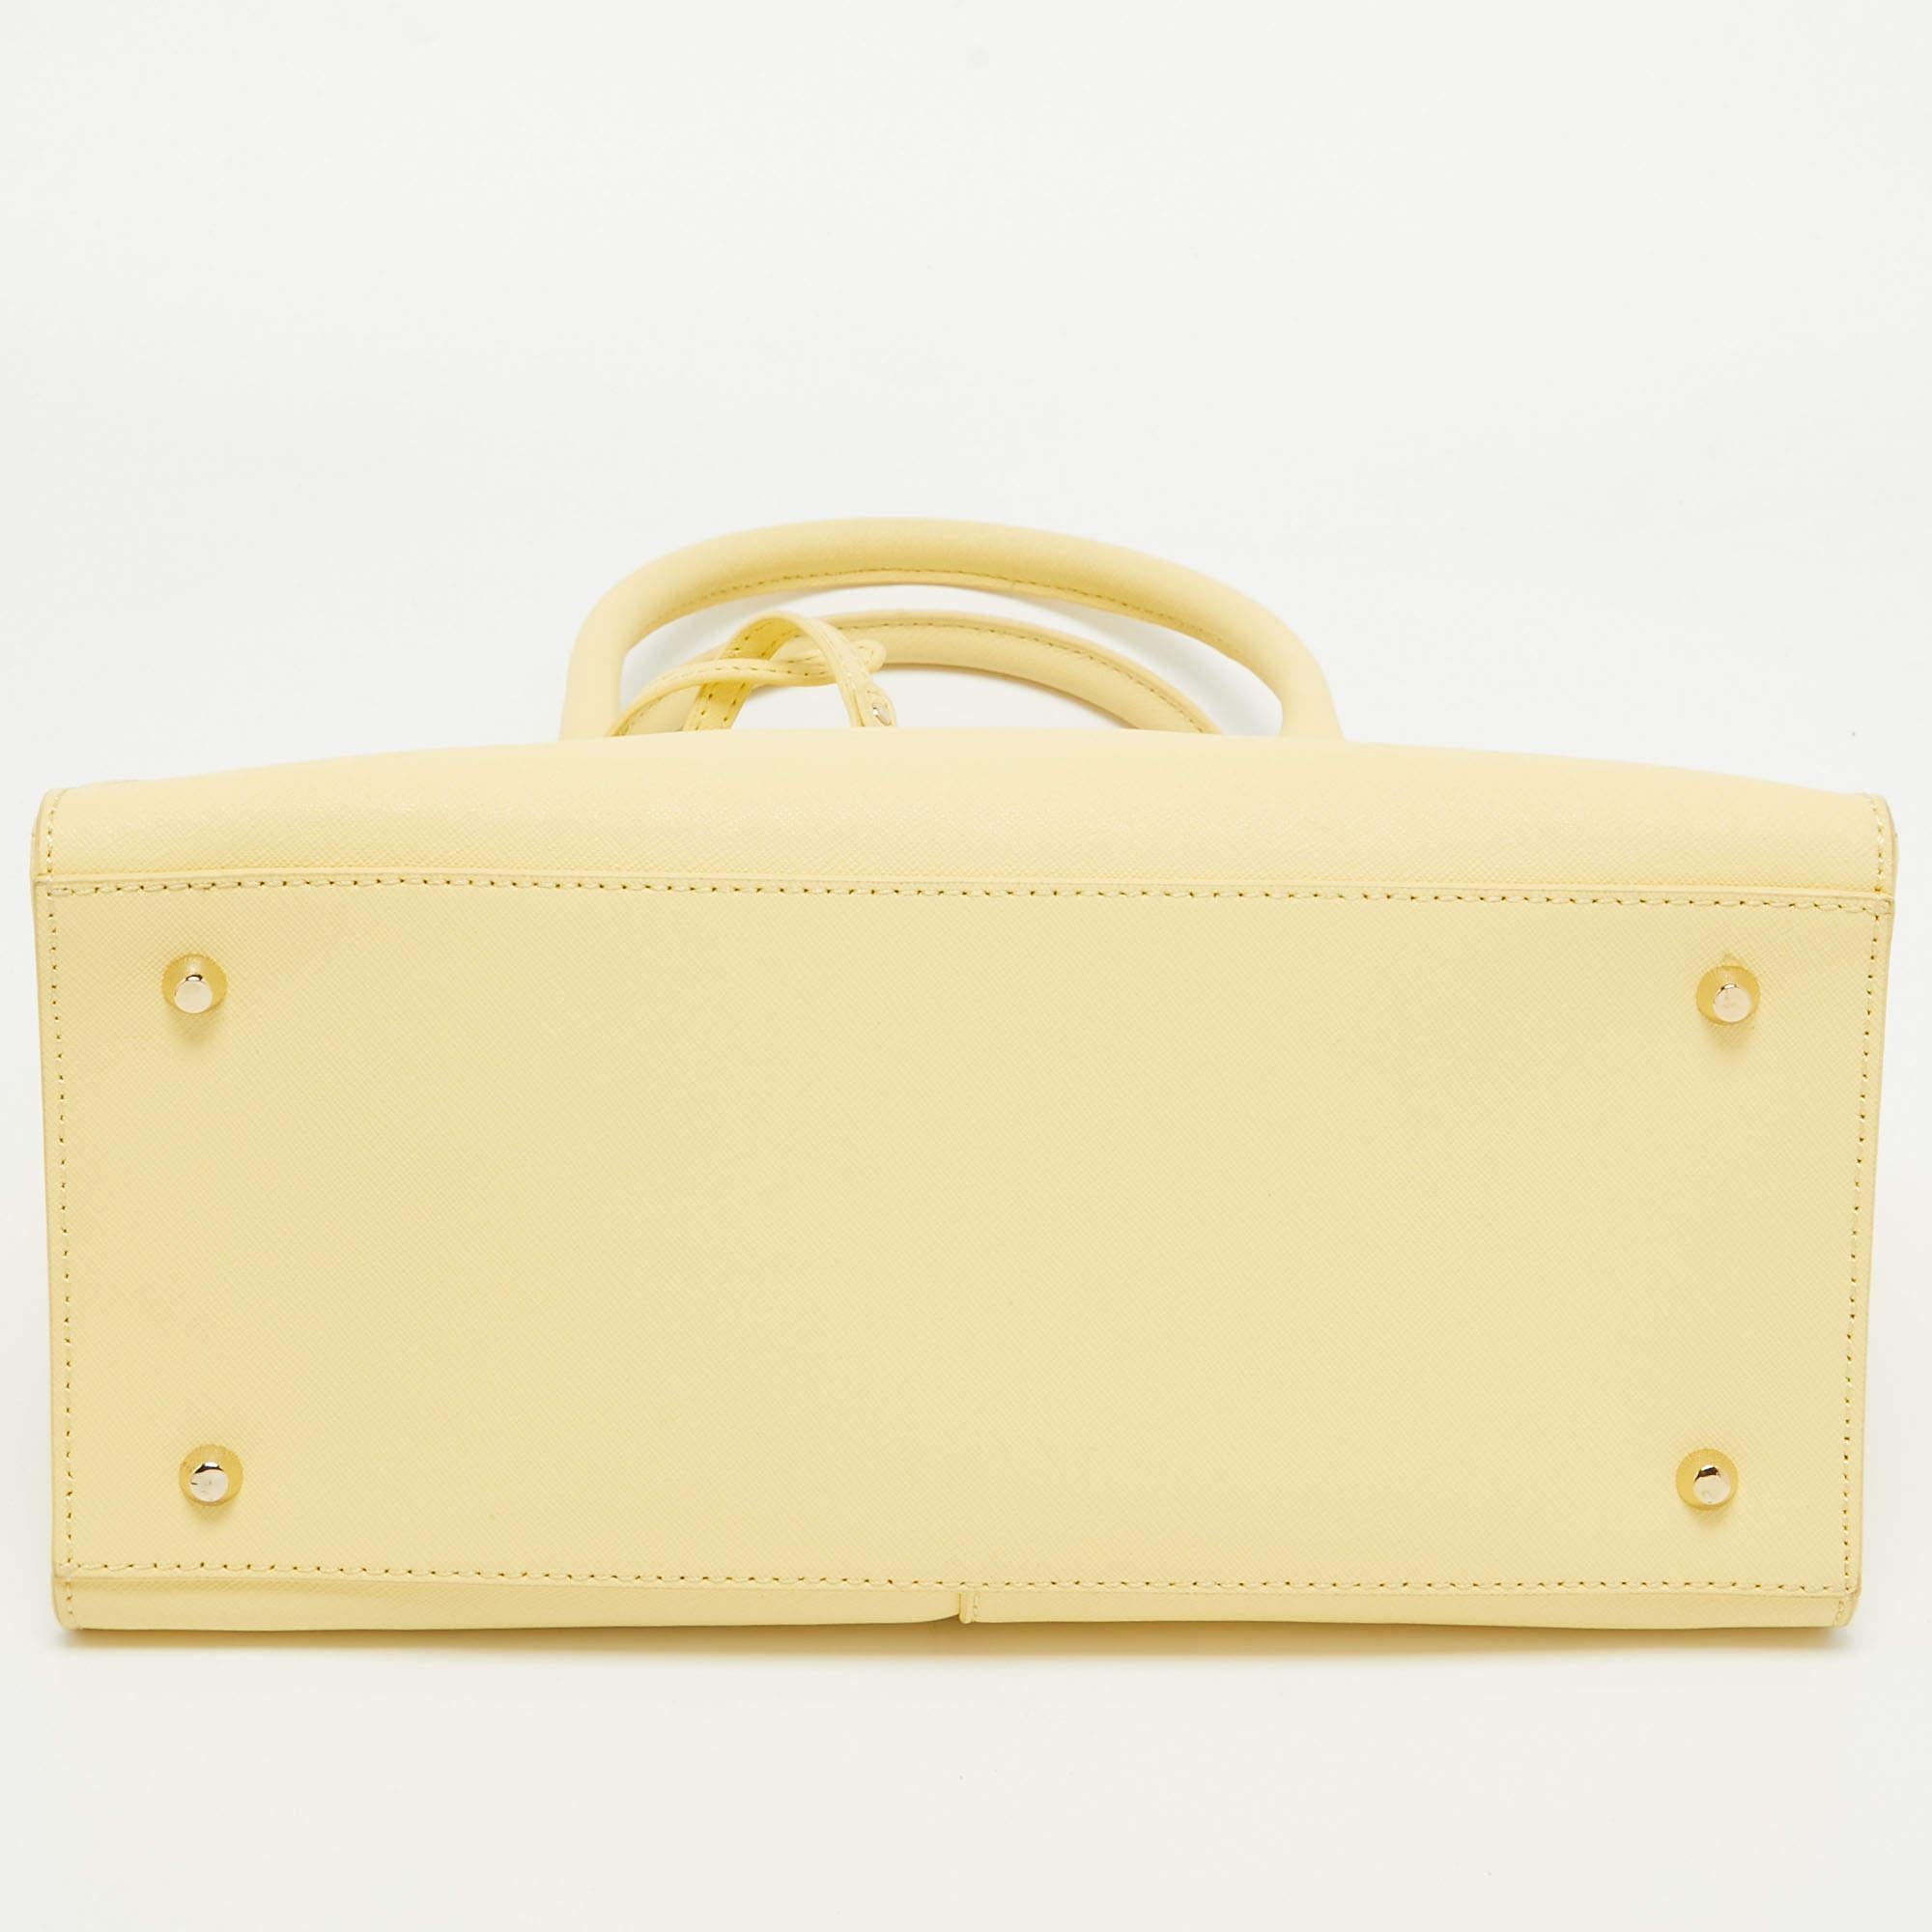 Dkny Yellow Leather Tote 1